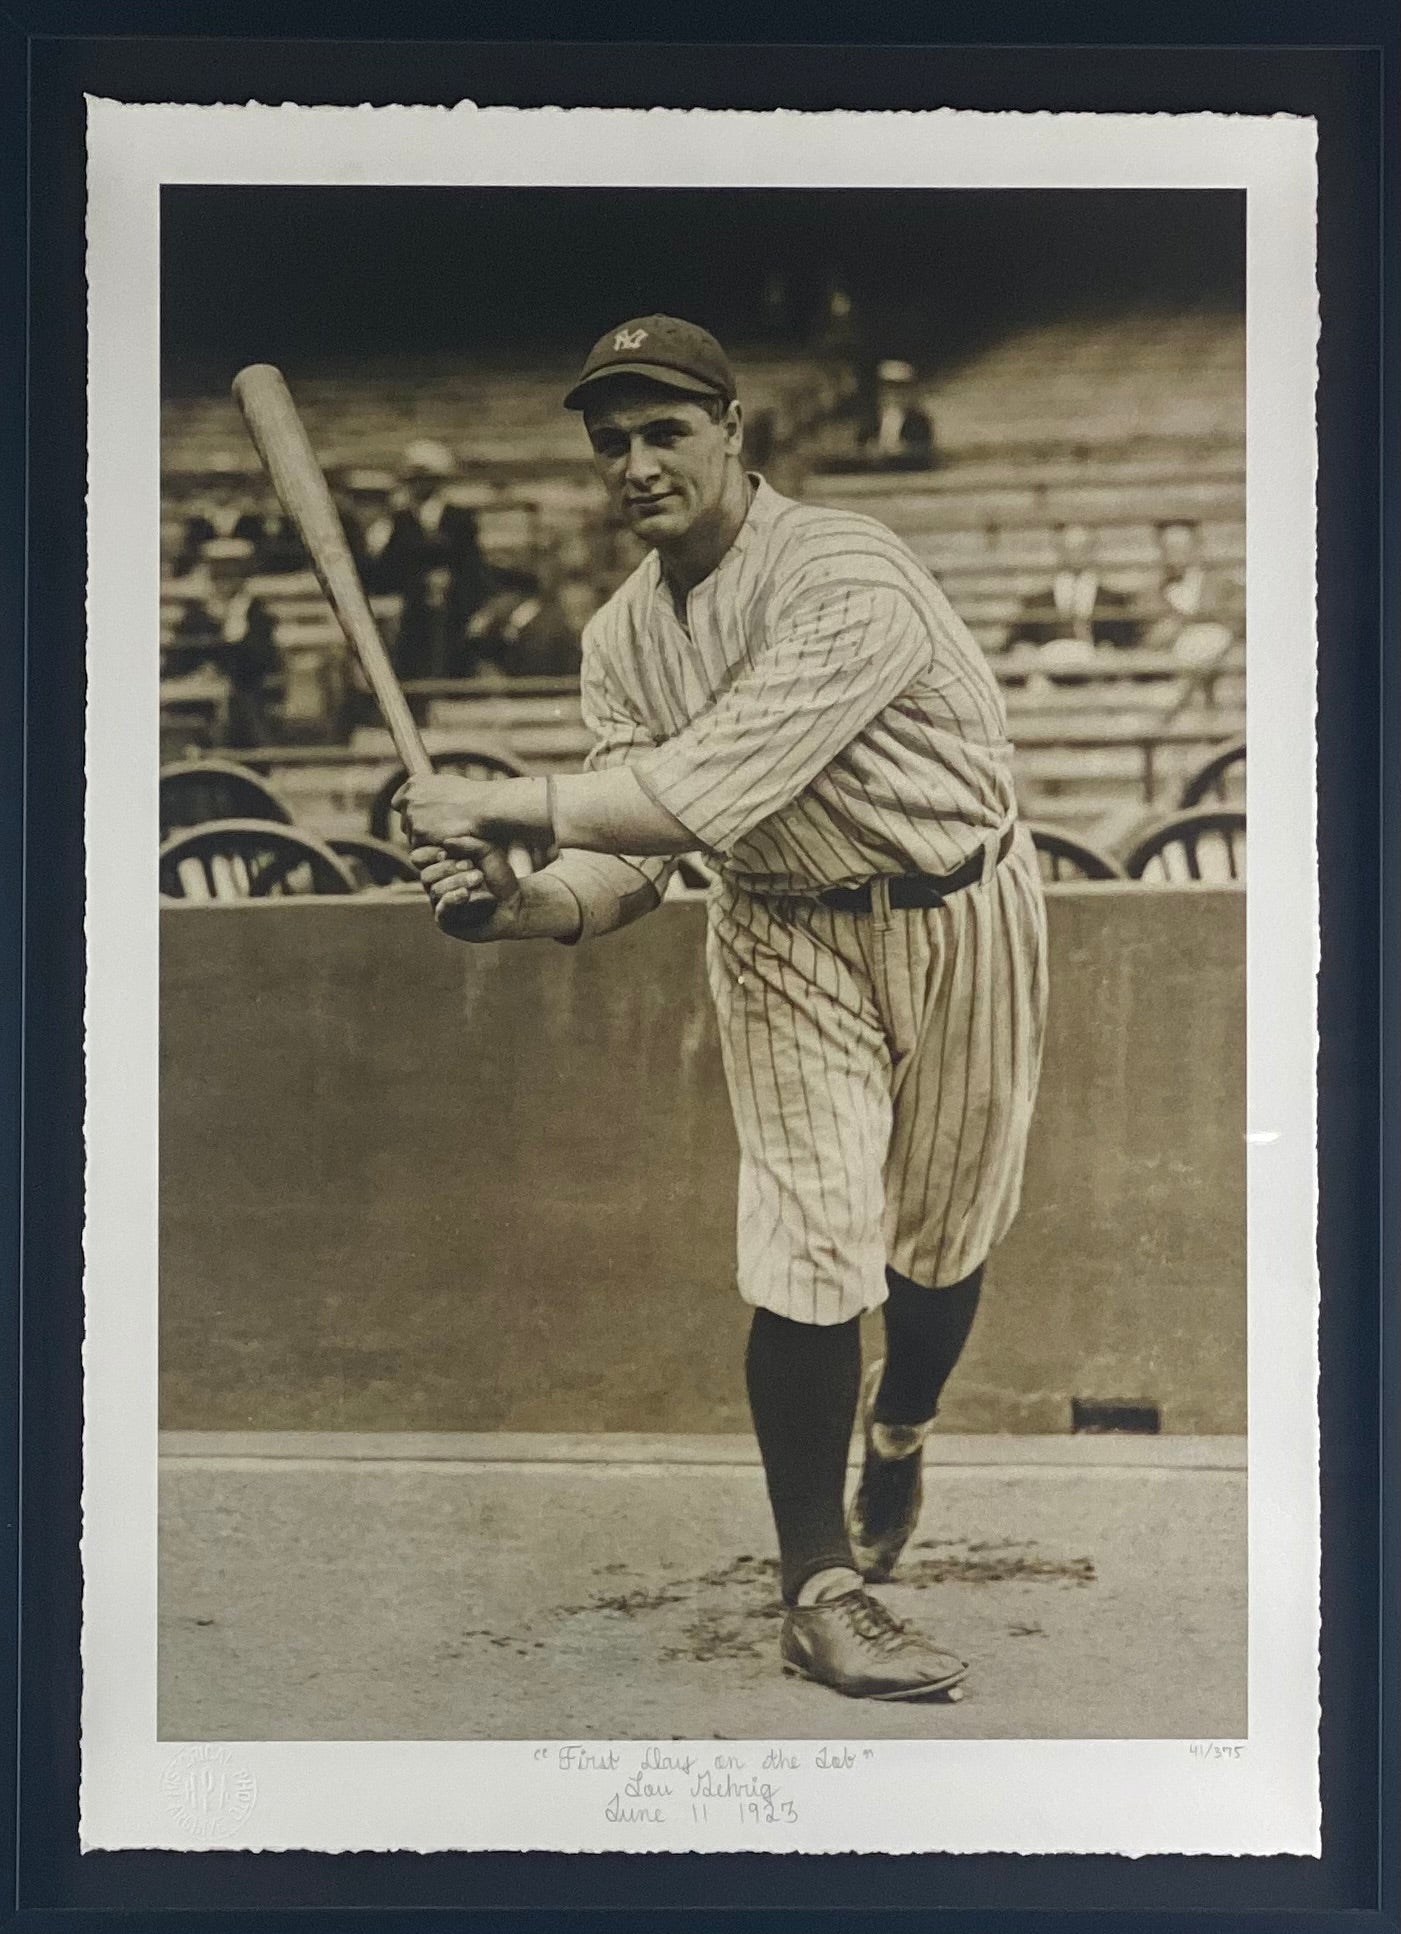 Lou Gehrig Professionally Framed "First Day on the Job"